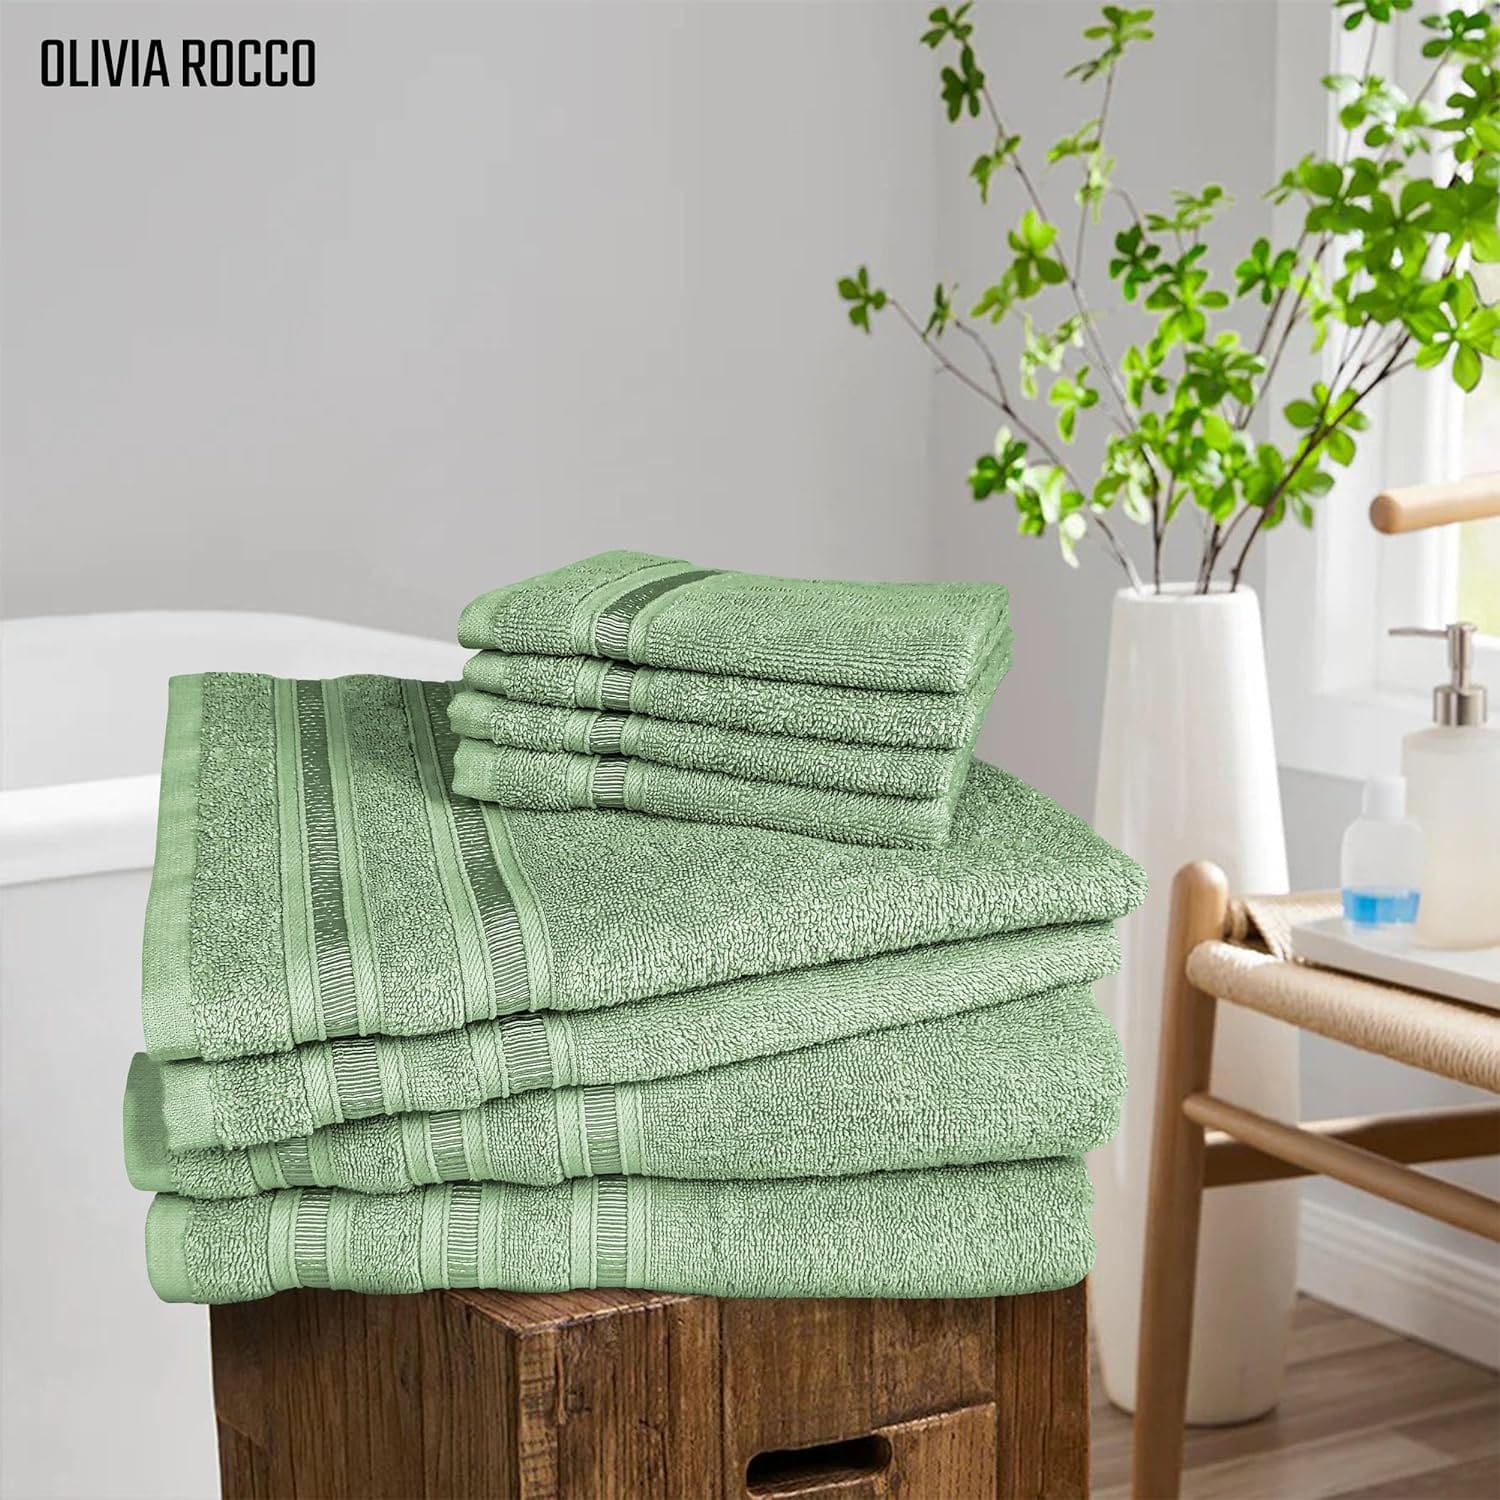 Ritz Collection Towel Sets Bale Viscose Stripe Towels Range Highly Absorbent OLIVIA ROCCO Towel